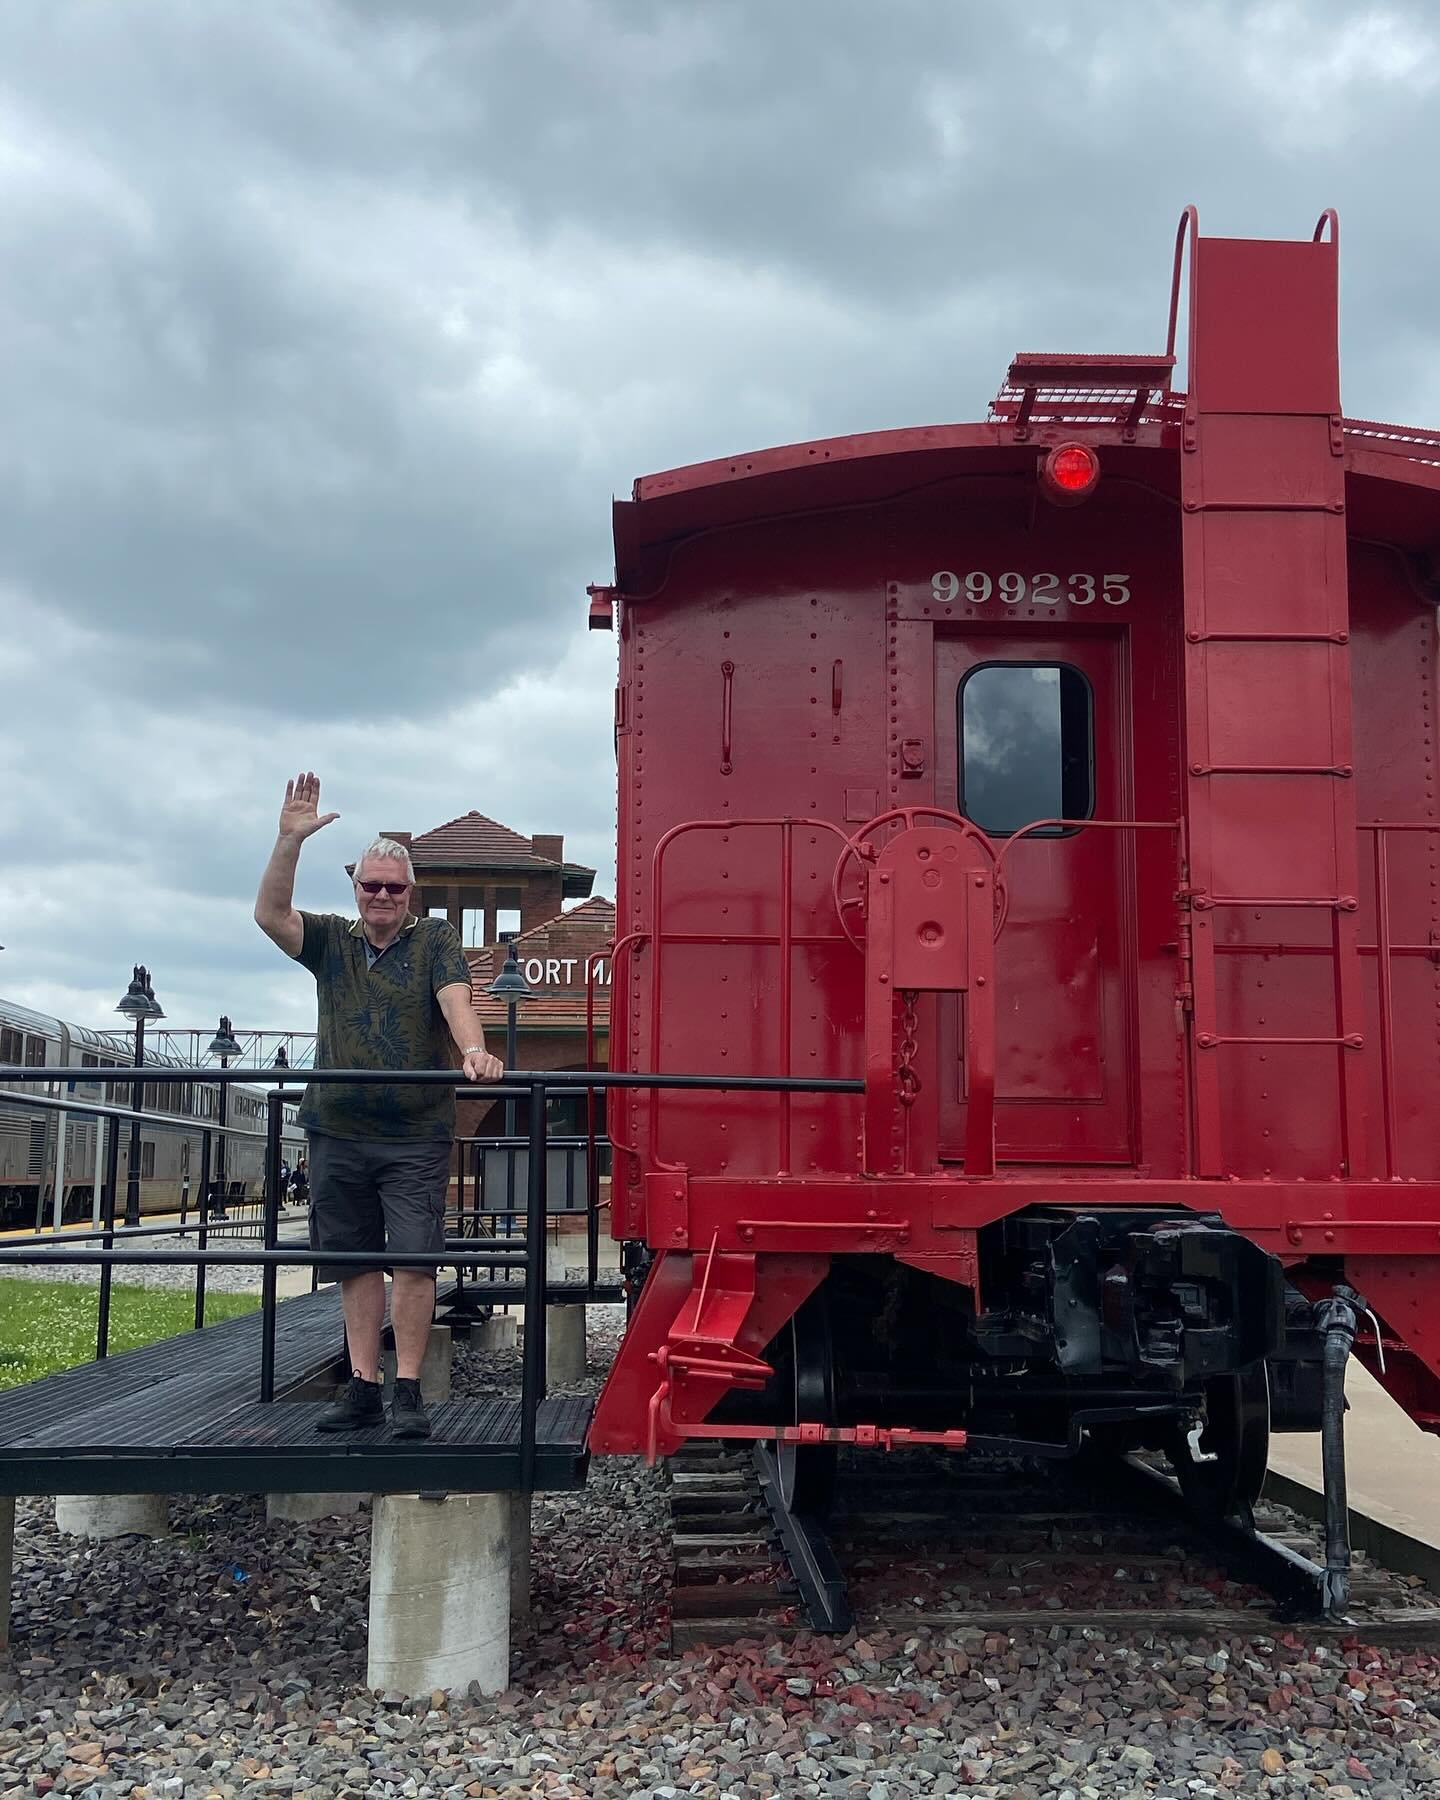 Welcome to Fort Madison Adriaan! After three years of enjoying our riverfront on Virtual Railfan from the Netherlands, he finally decided to planning his visit this past winter. It&rsquo;s incredible how a simple question like &ldquo;What if I just w